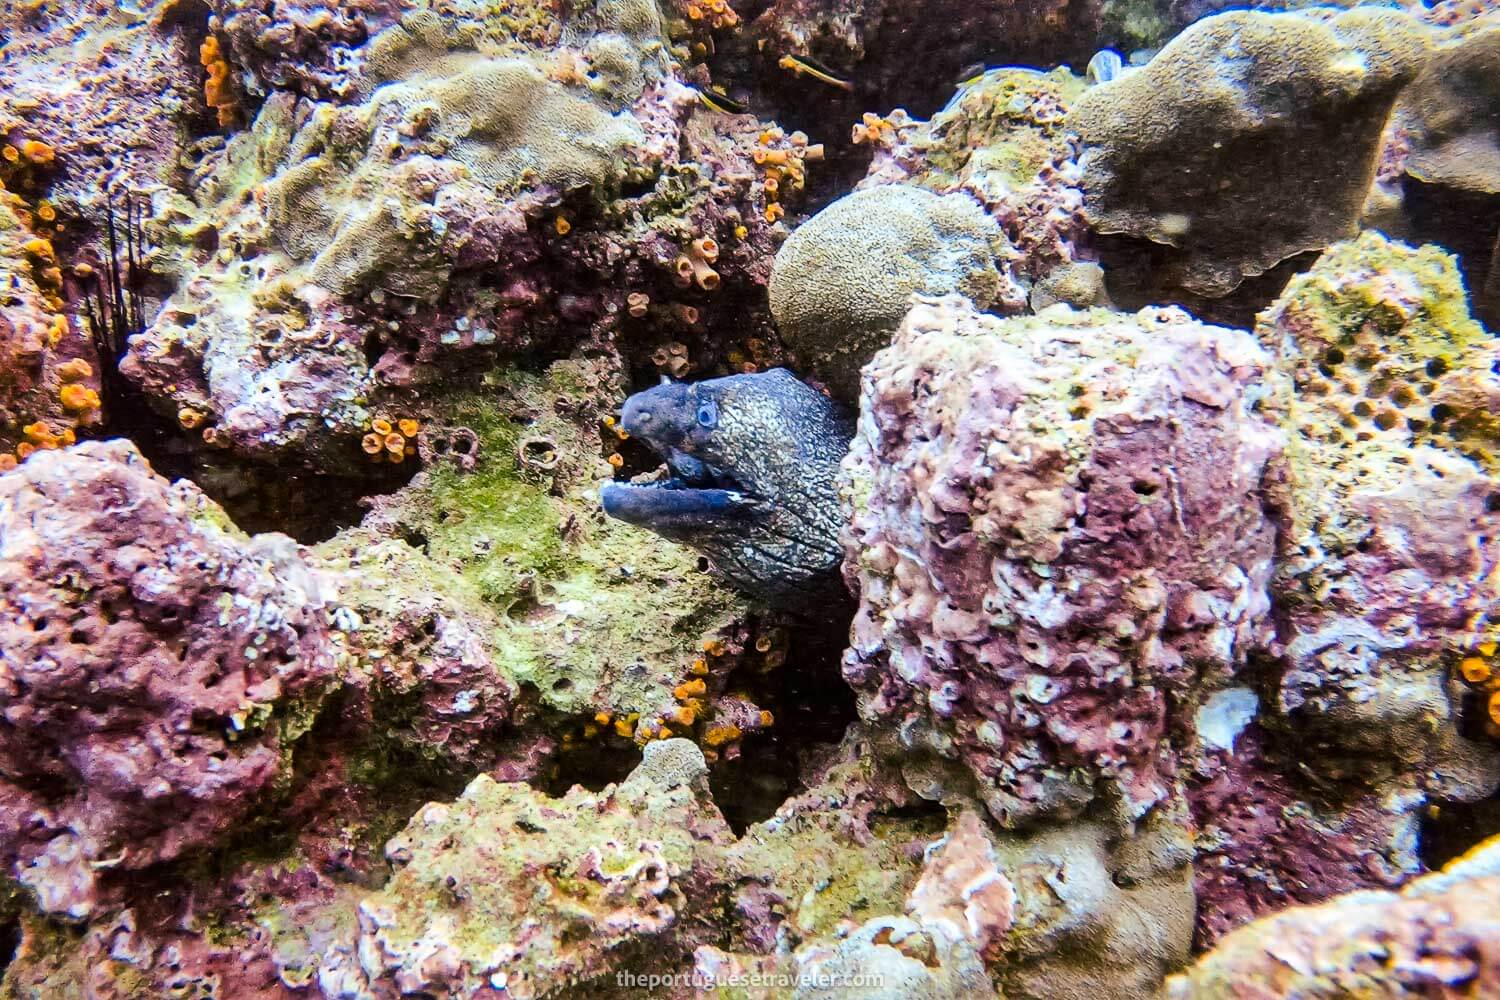 One of the many eels at El Acuario dive site